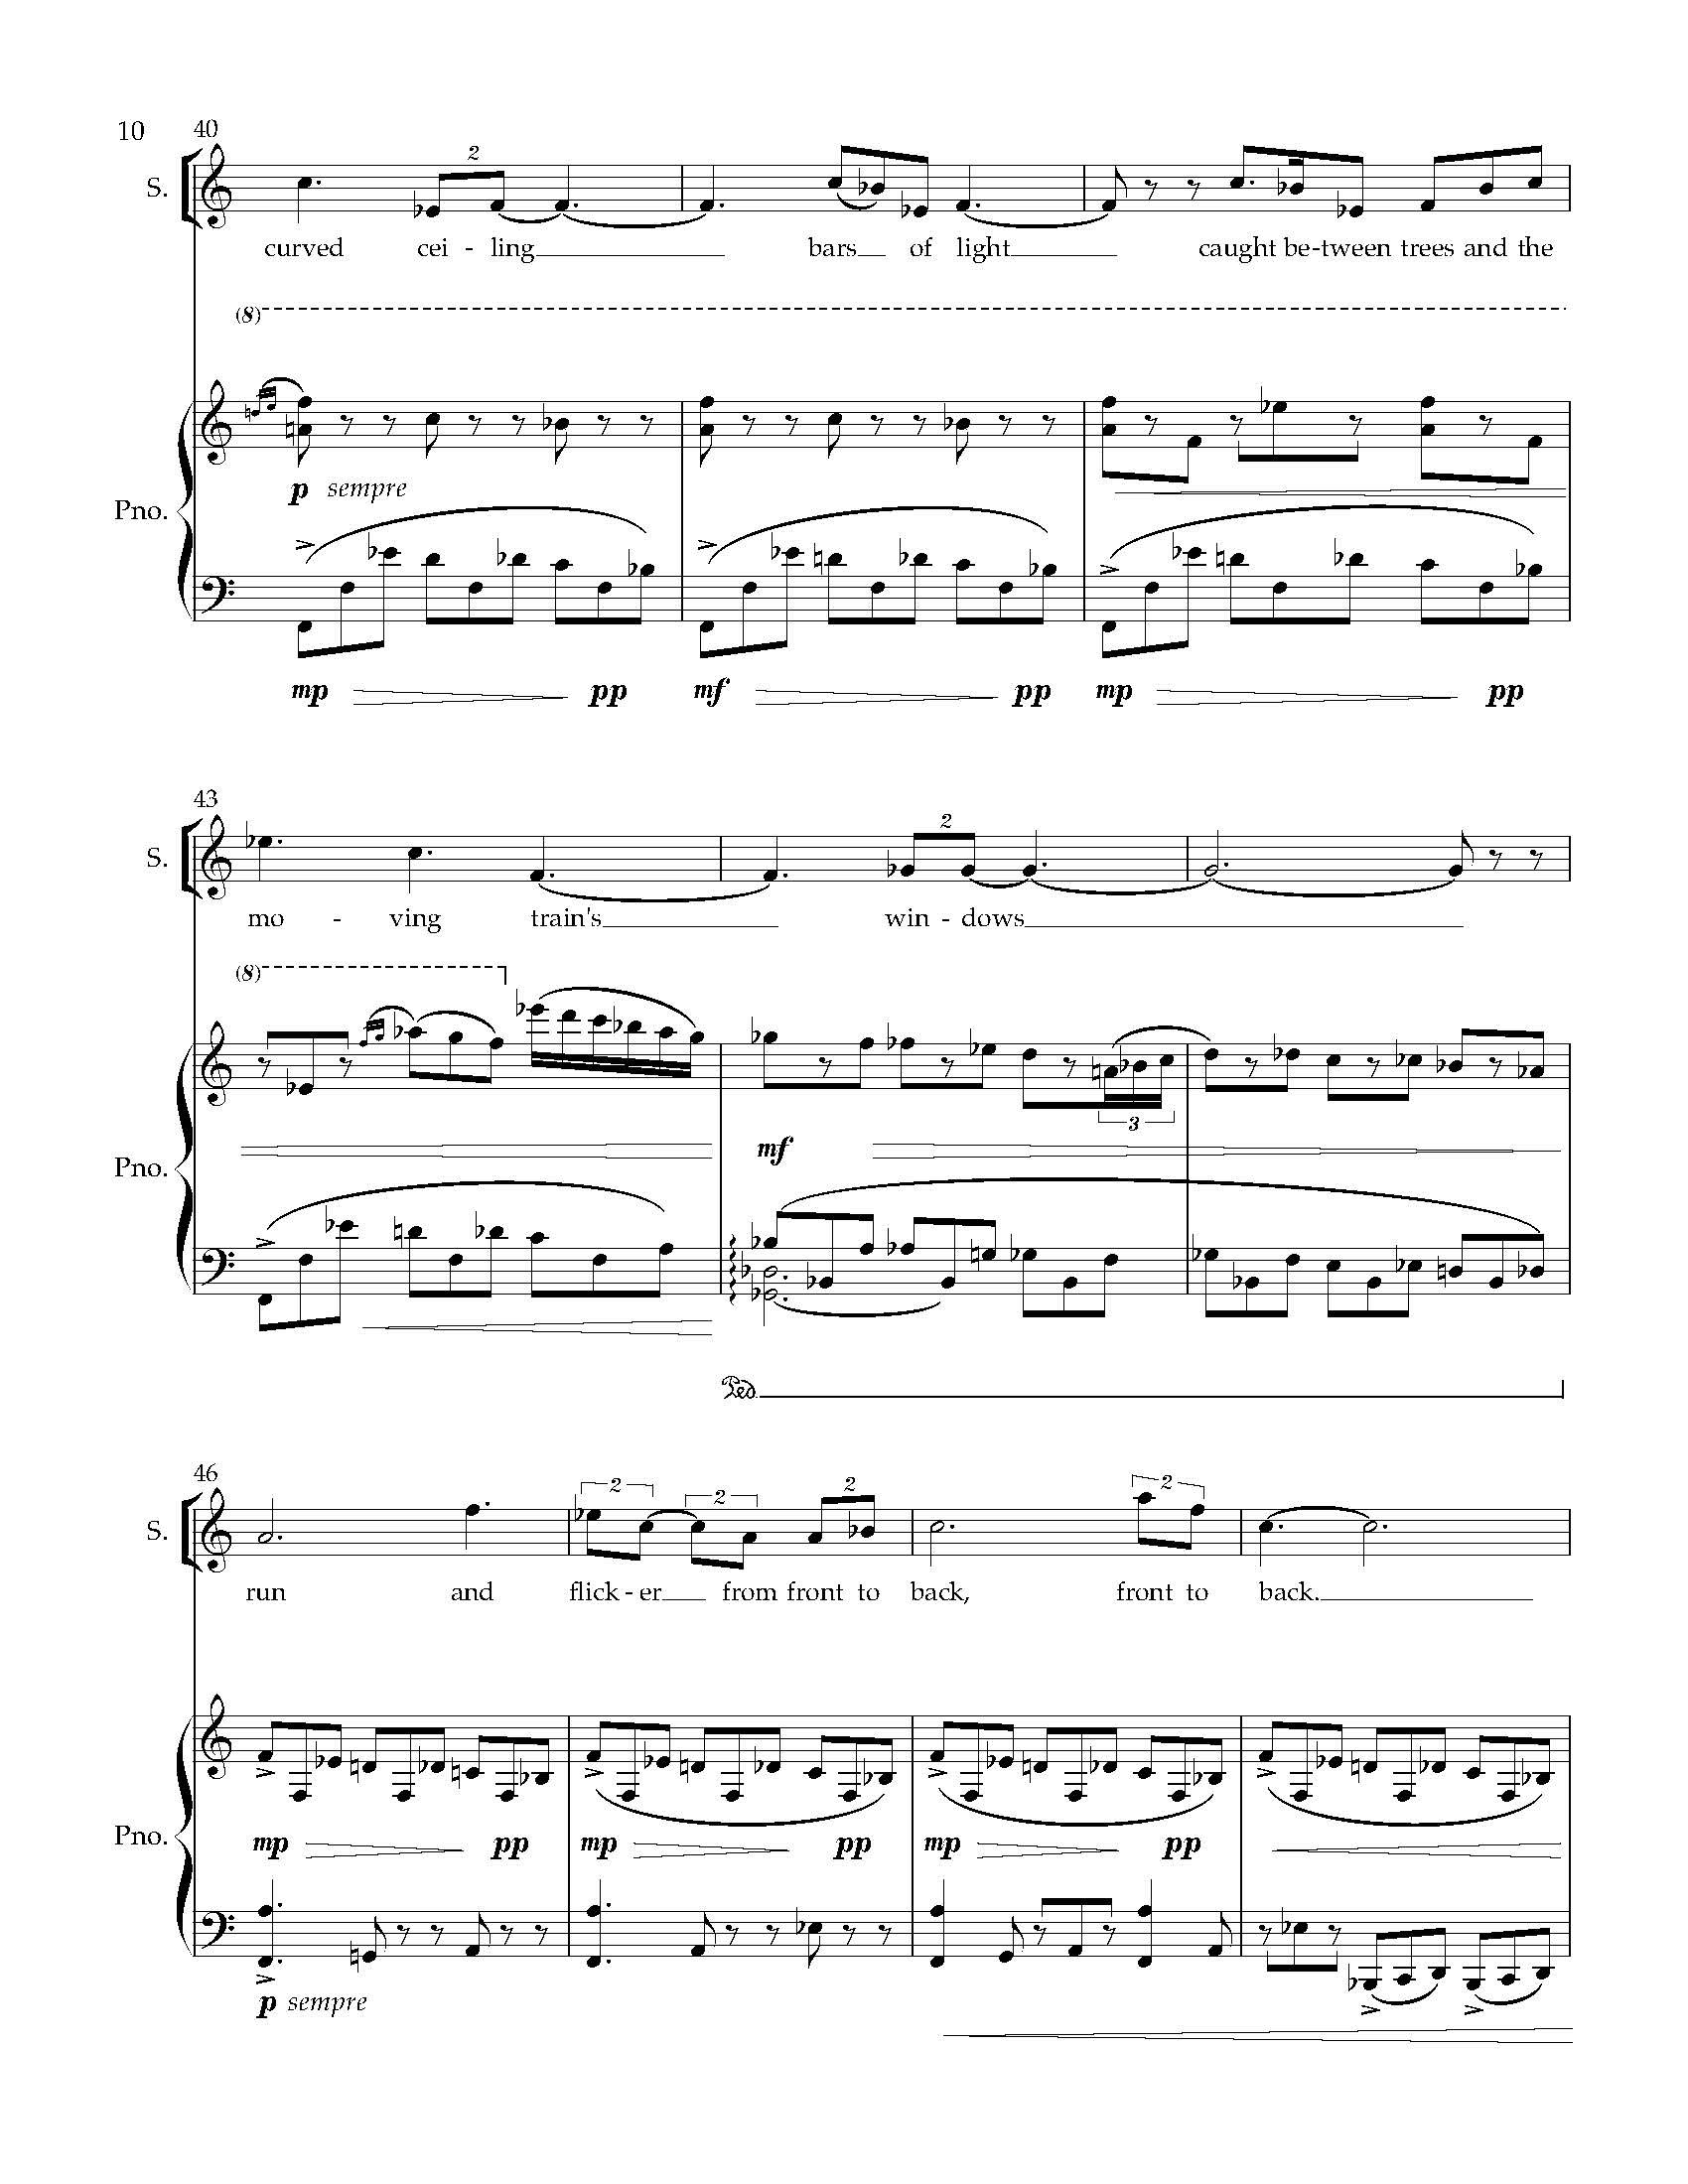 Sky - Complete Score (Revised)_Page_16.jpg